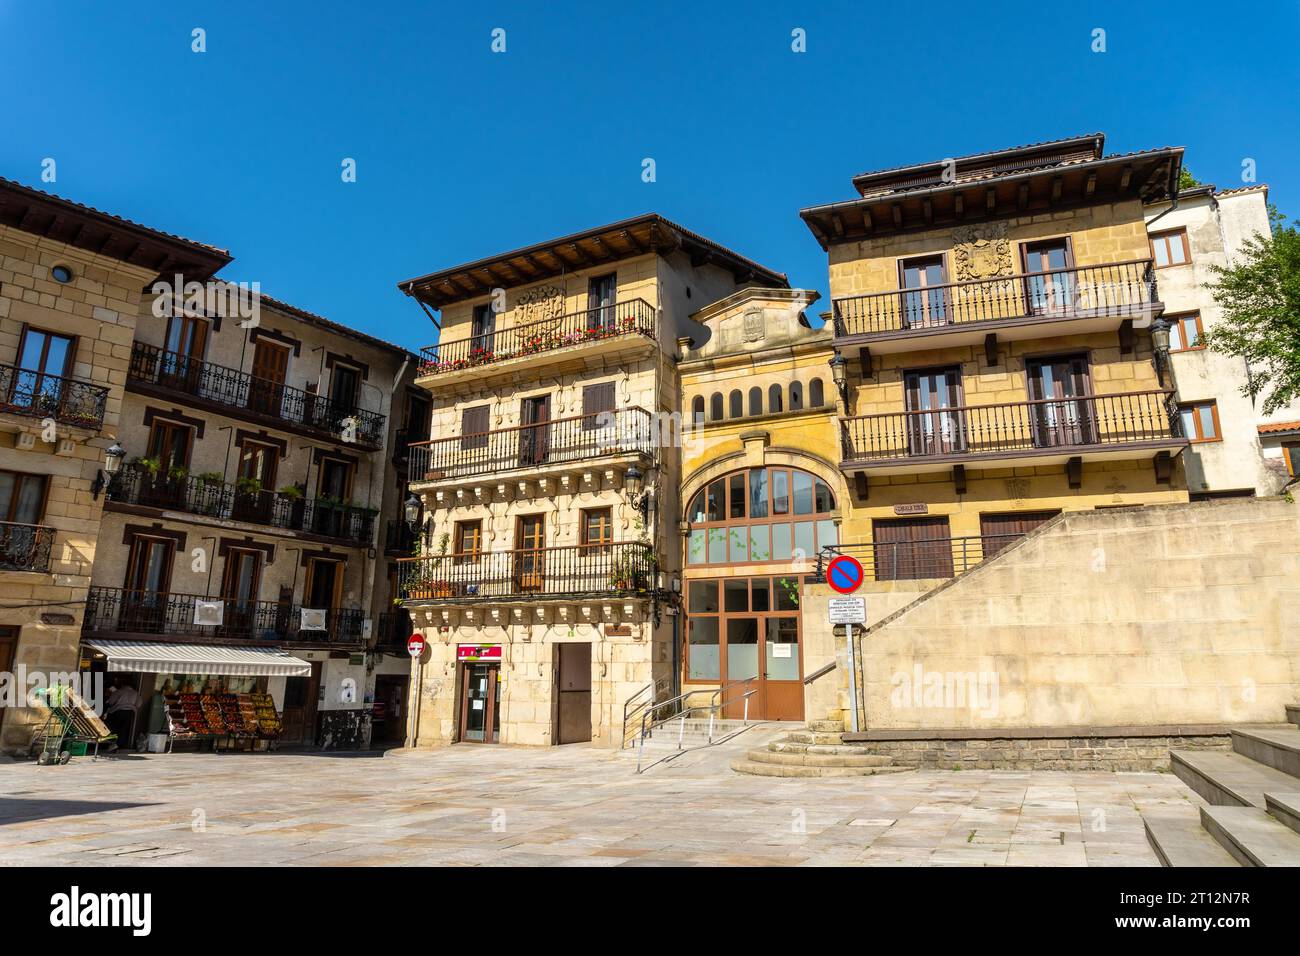 The town square of the municipality of Lezo, the small coastal town in the province of Gipuzkoa, Basque Country. Spain Stock Photo